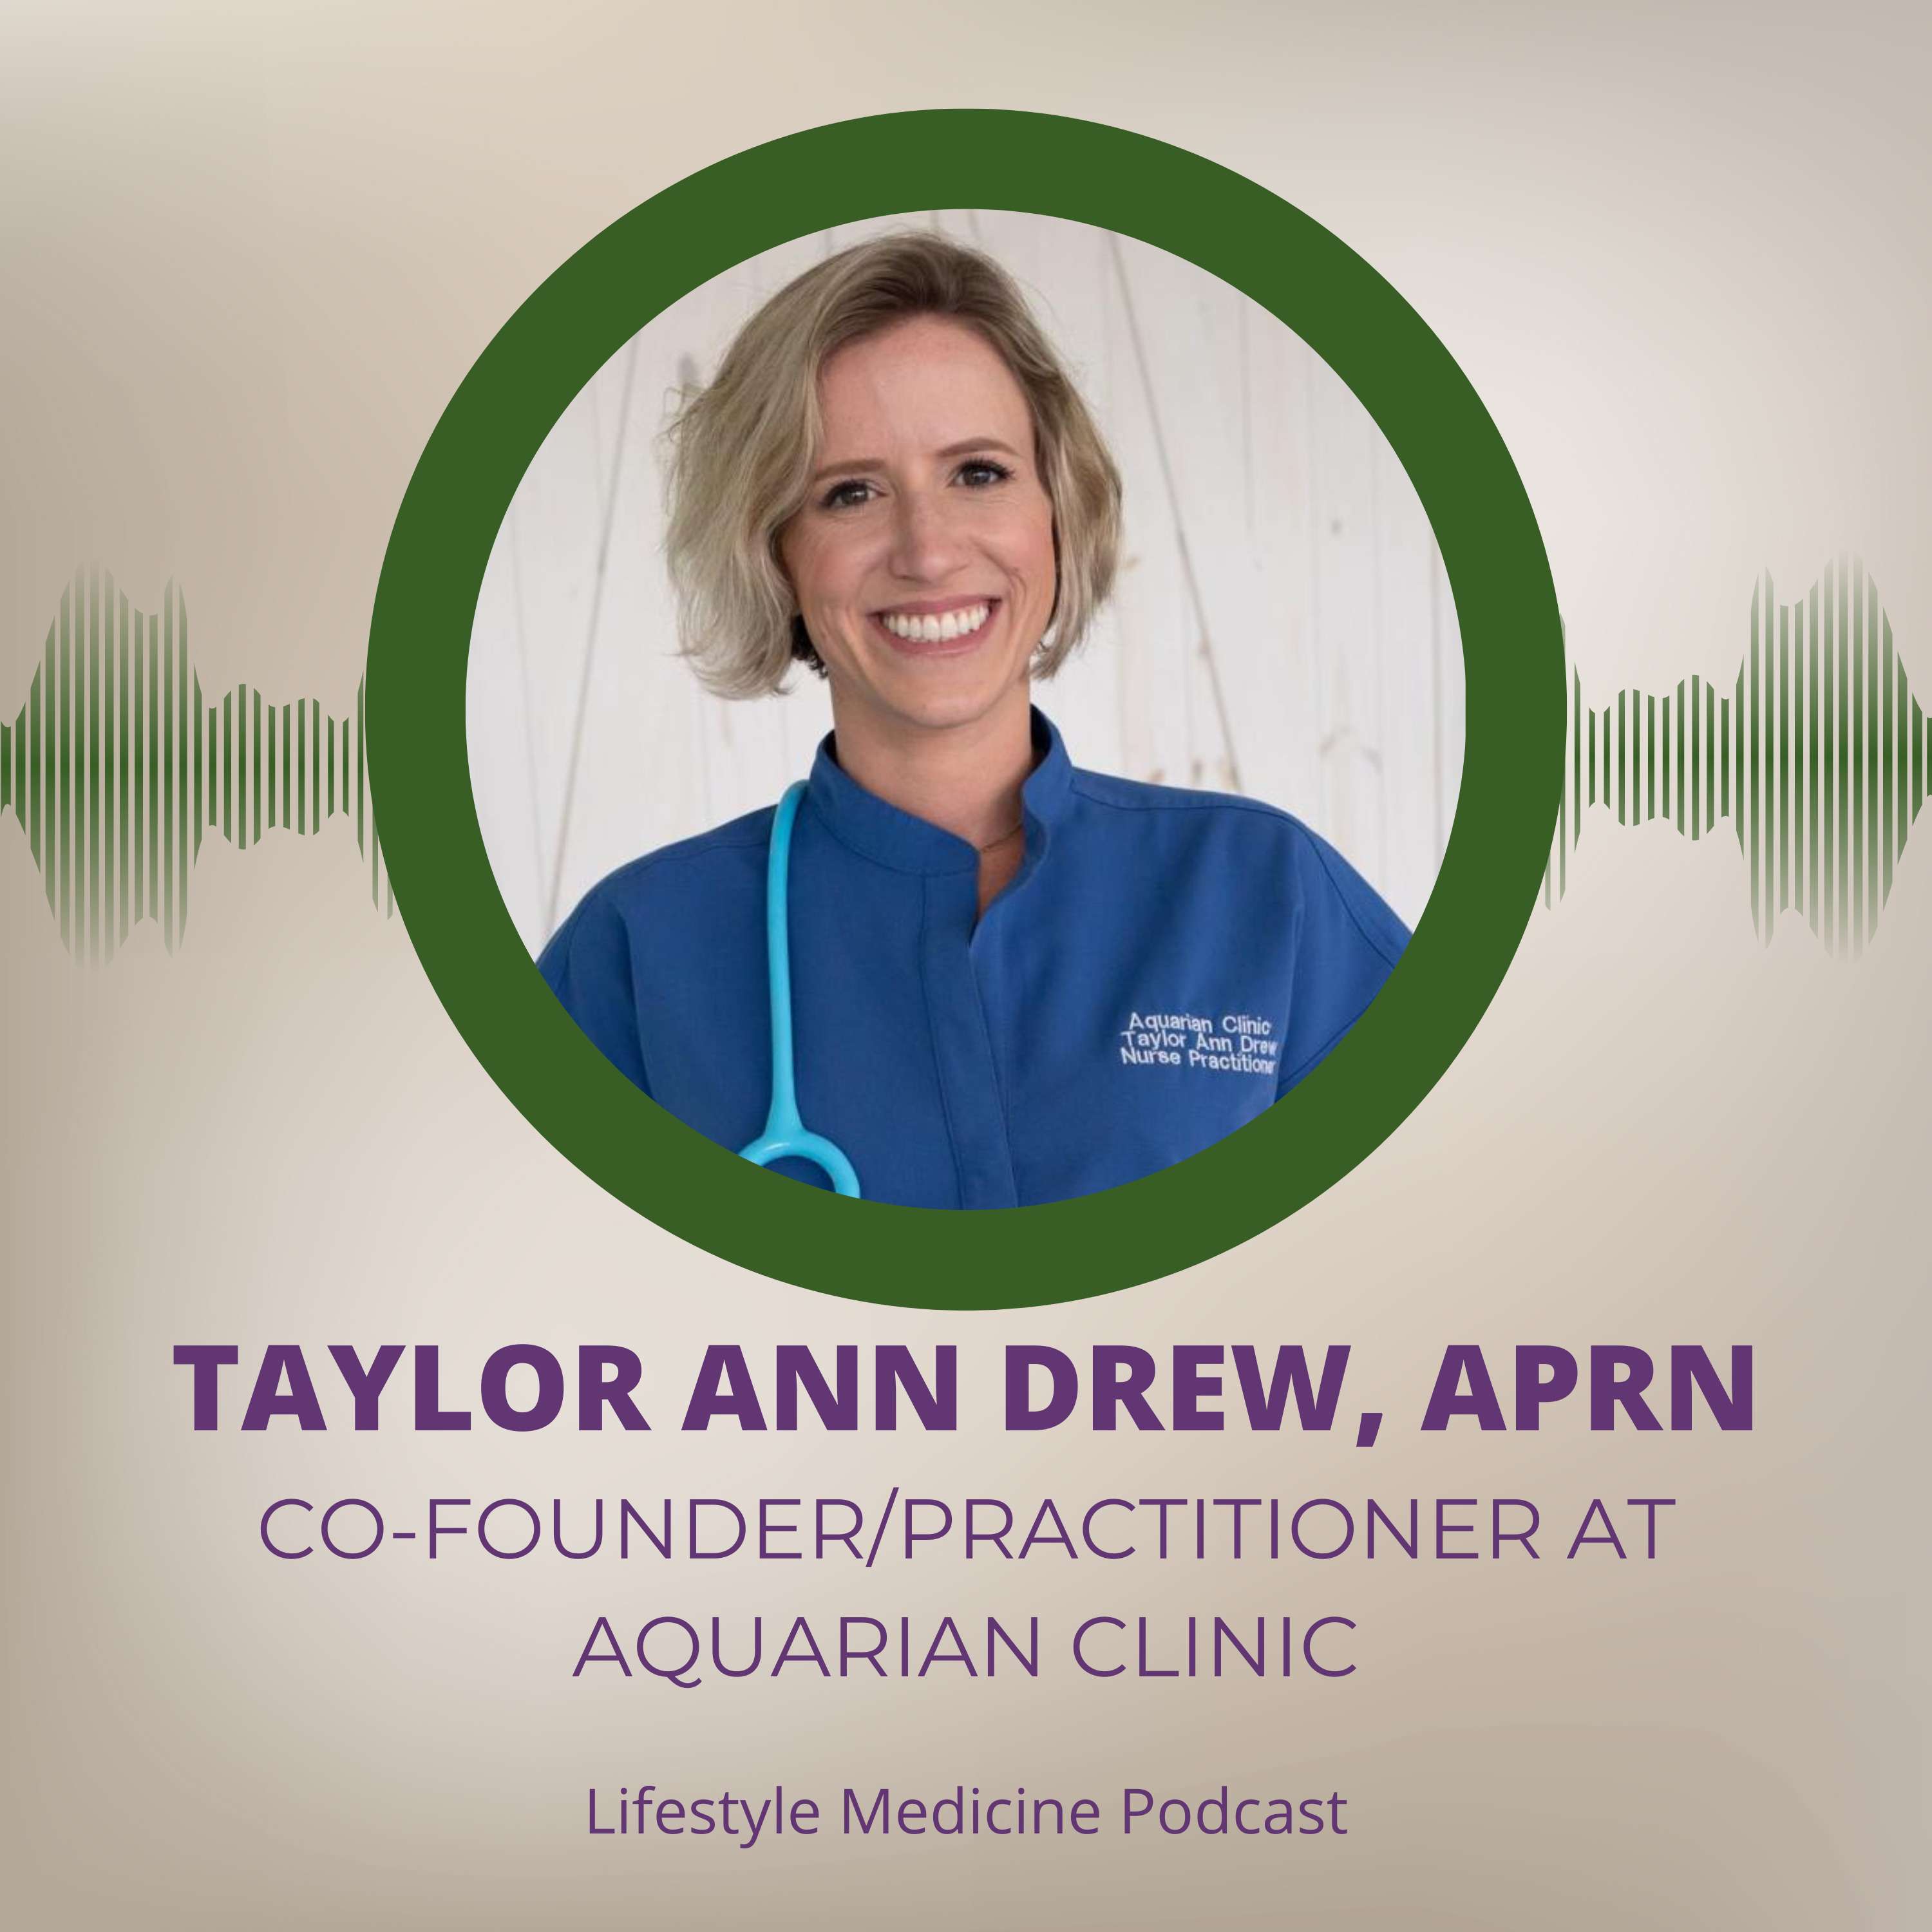 Taylor Ann Drew, APRN | Co-Founder/Practitioner at Aquarian Clinic